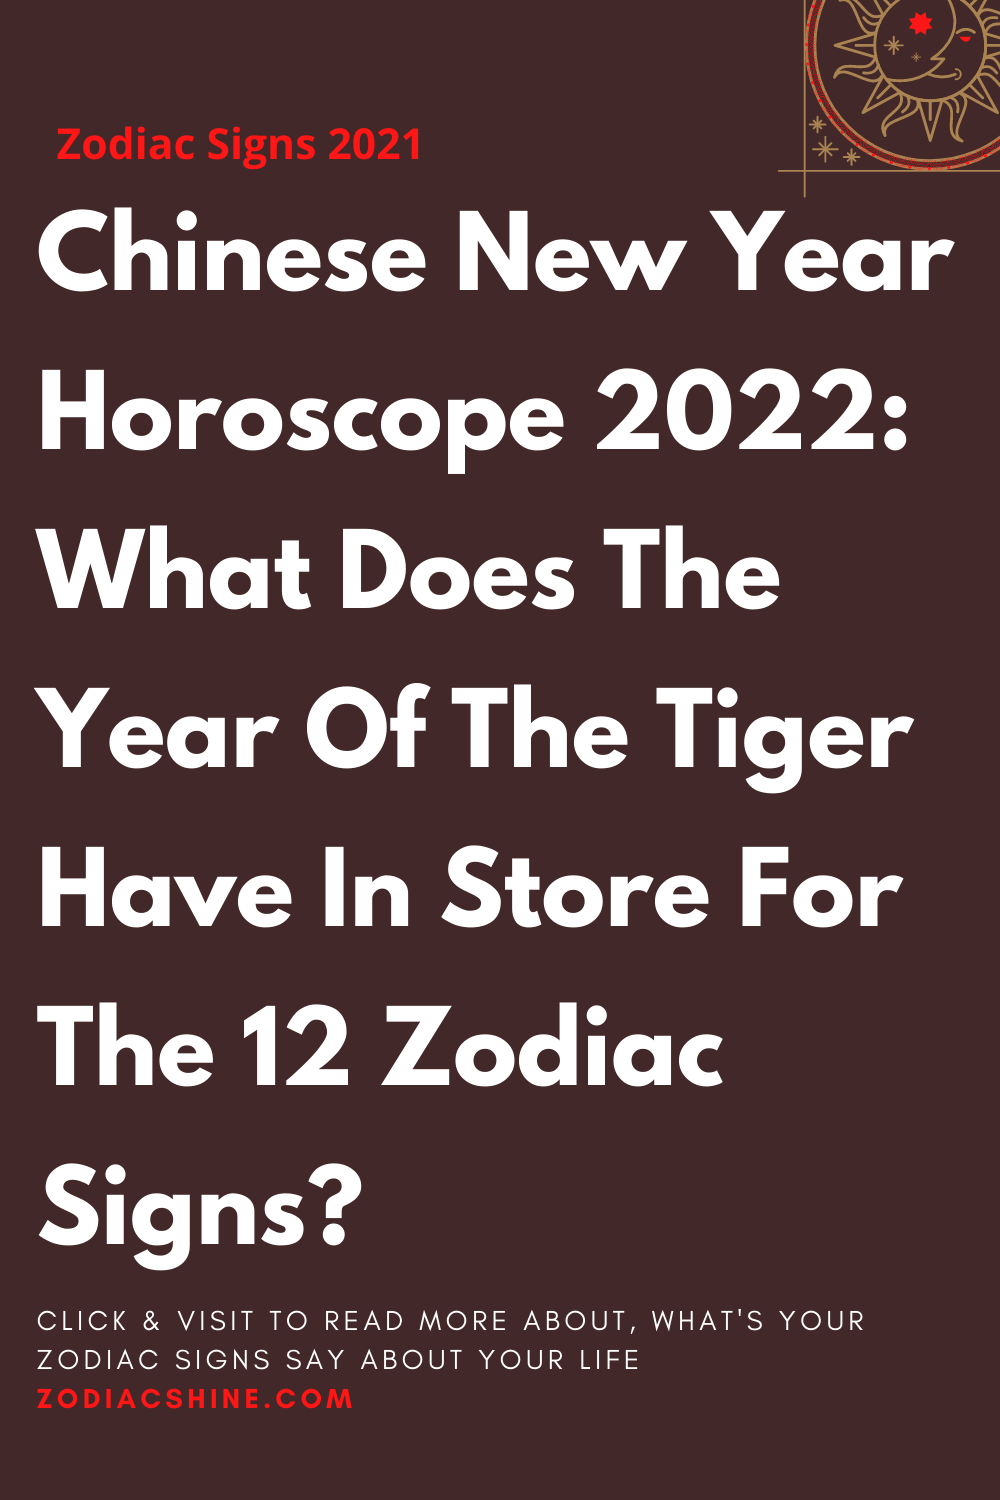 Chinese New Year Horoscope 2022: What Does The Year Of The Tiger Have In Store For The 12 Zodiac Signs?